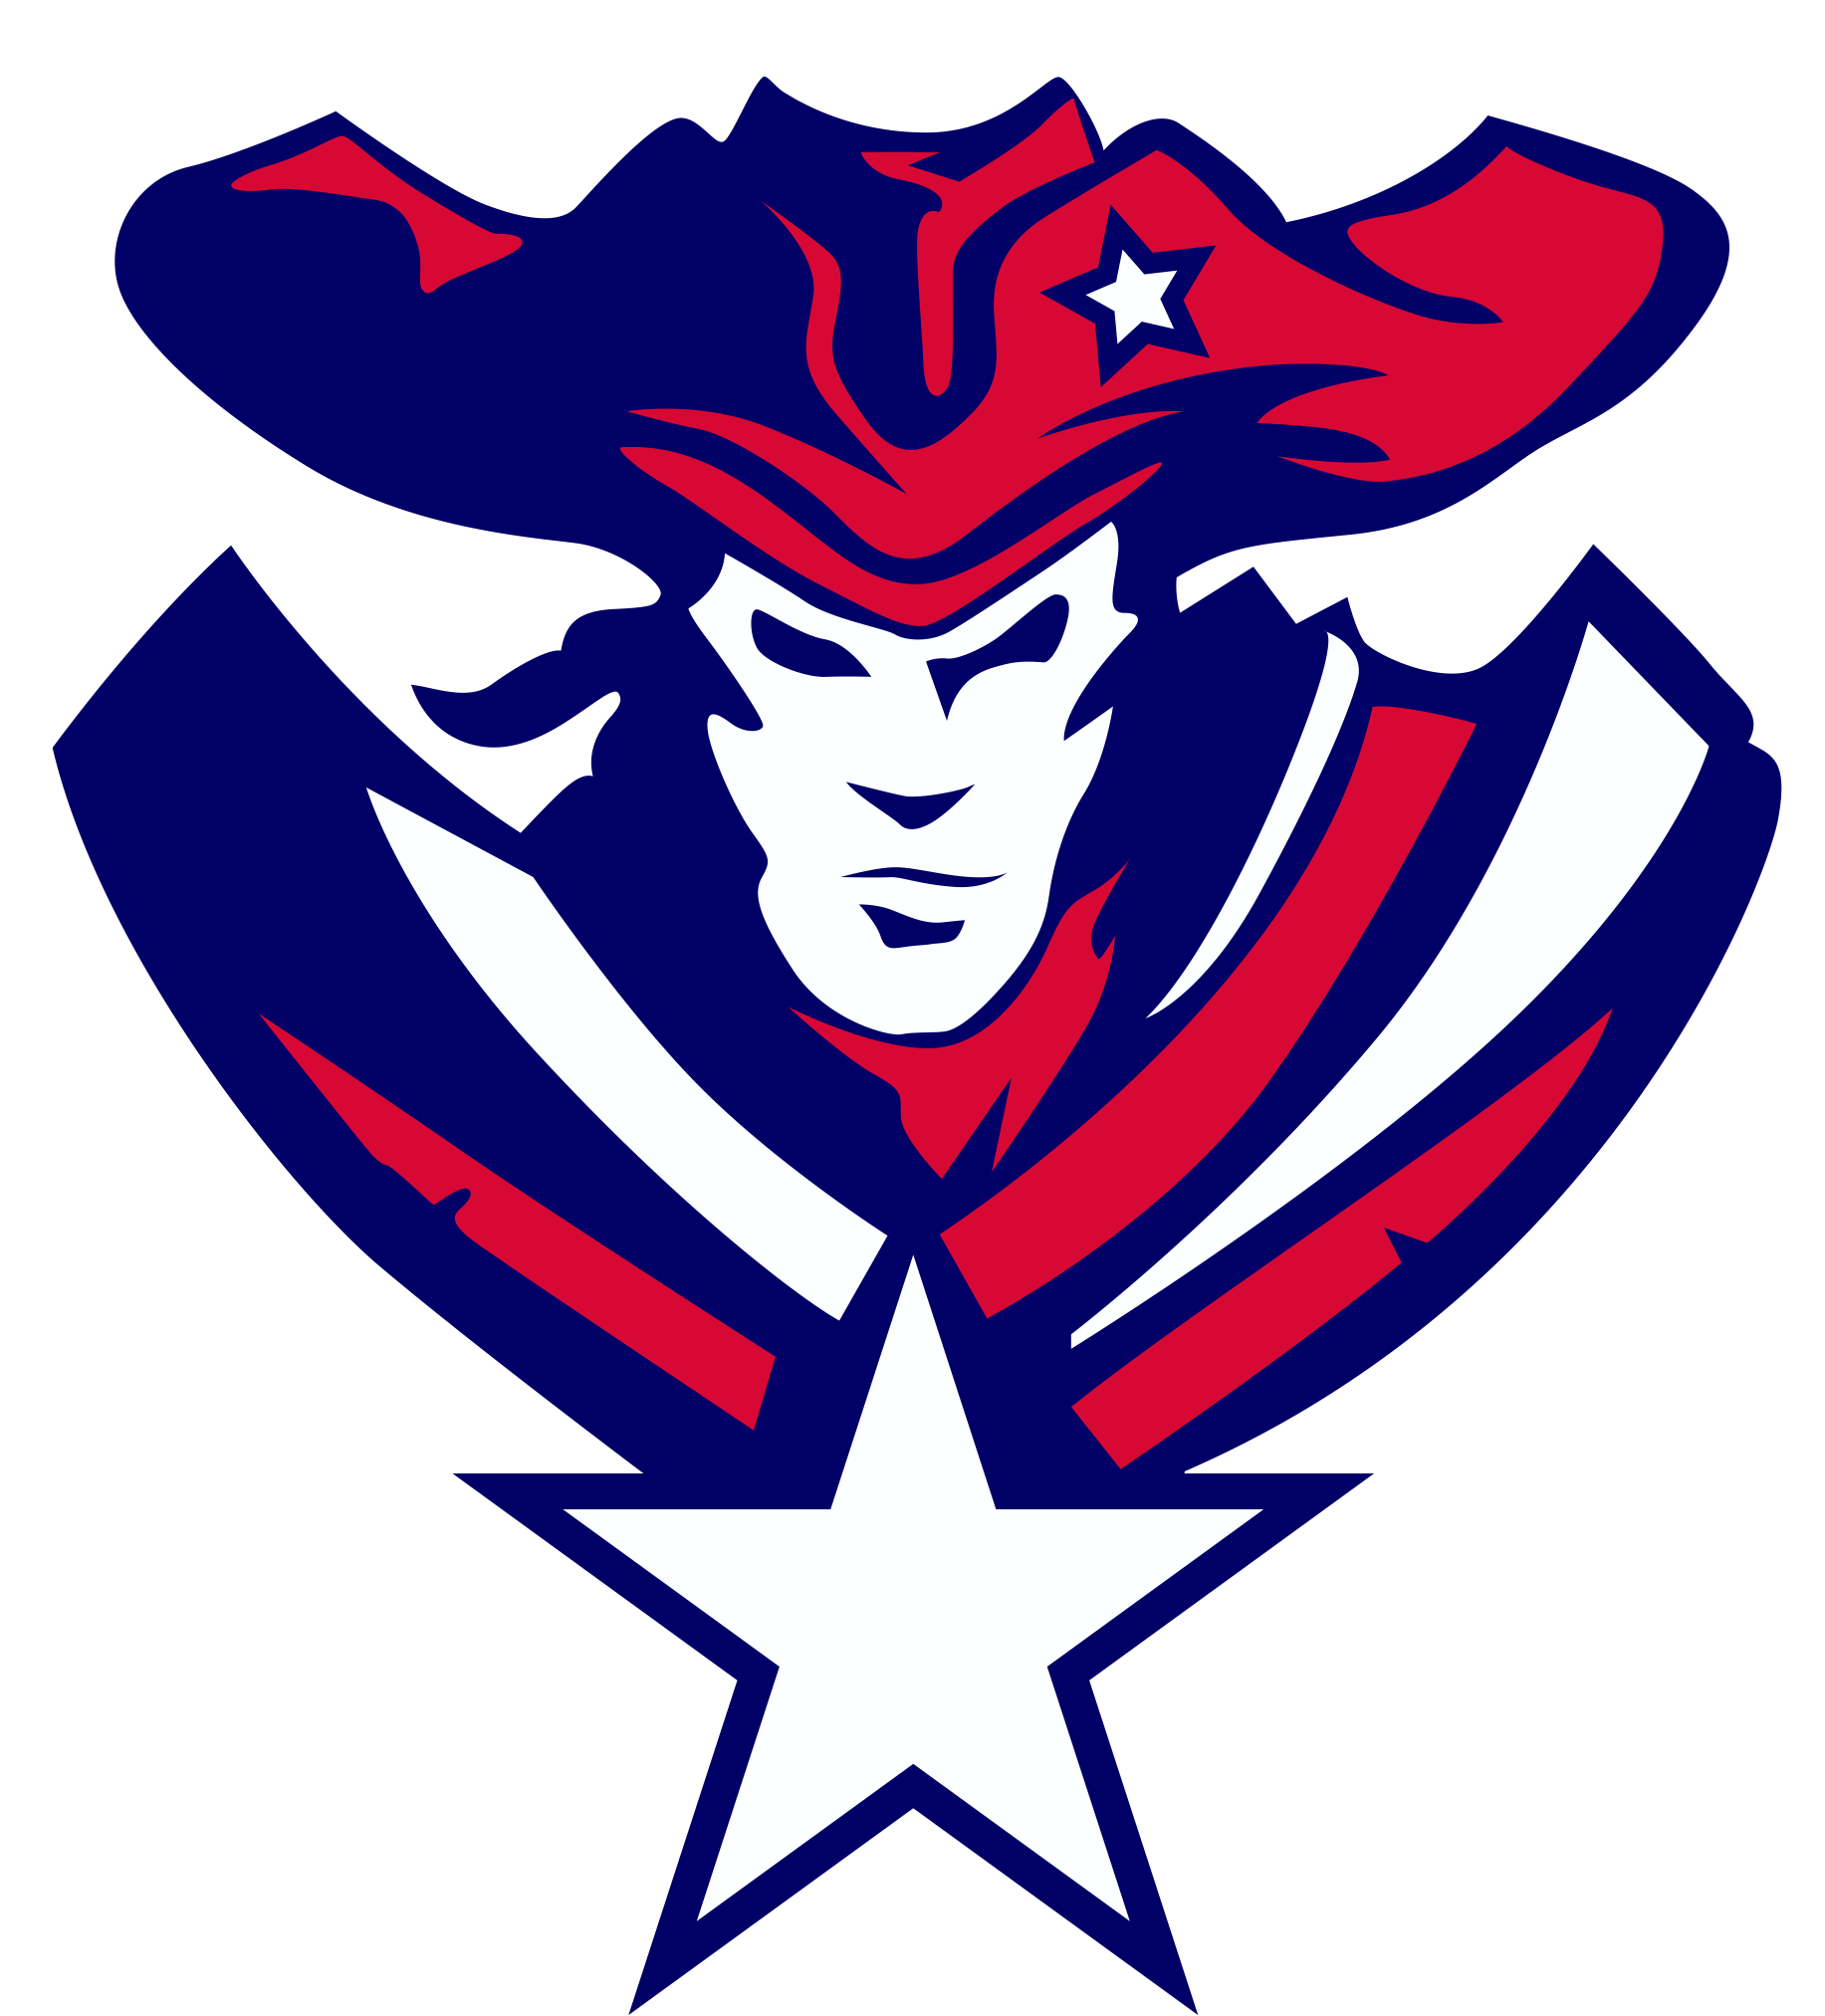 Patriot Basketball Logo - Home - Central Academy Middle School